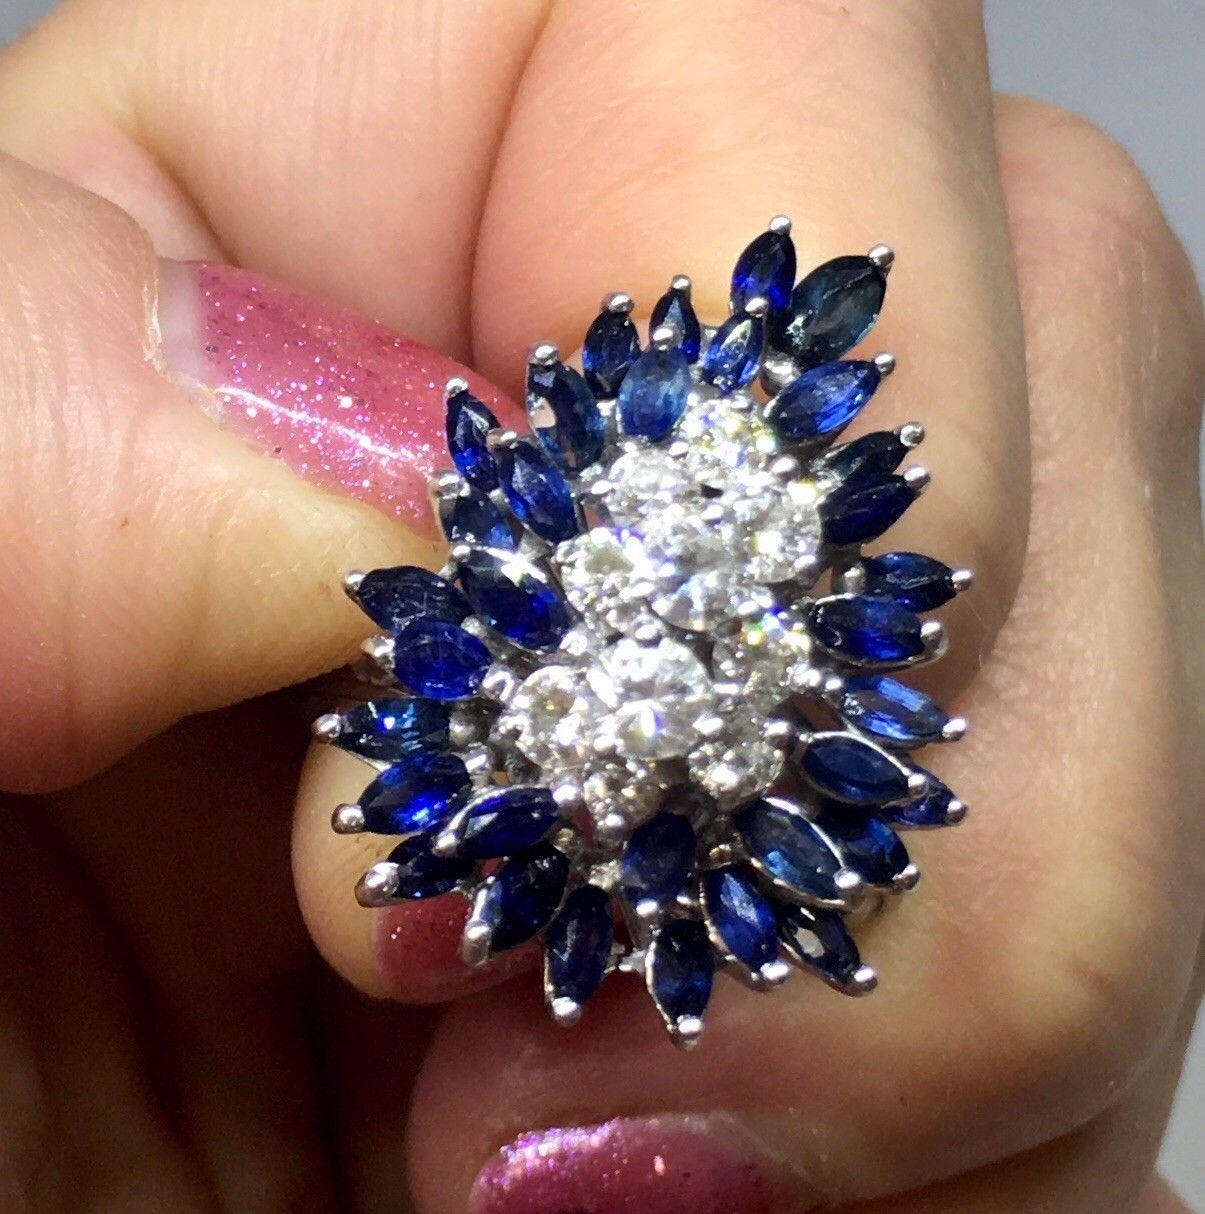 Stunning 1950s G/VS1 2.48 Sapphire Diamond Spray Cluster Cocktail Statement Ring

Stylish 1950s 14k white gold sapphire and diamond statement ring is set with an impressive array of marquise cut natural blue sapphires, with a total estimated